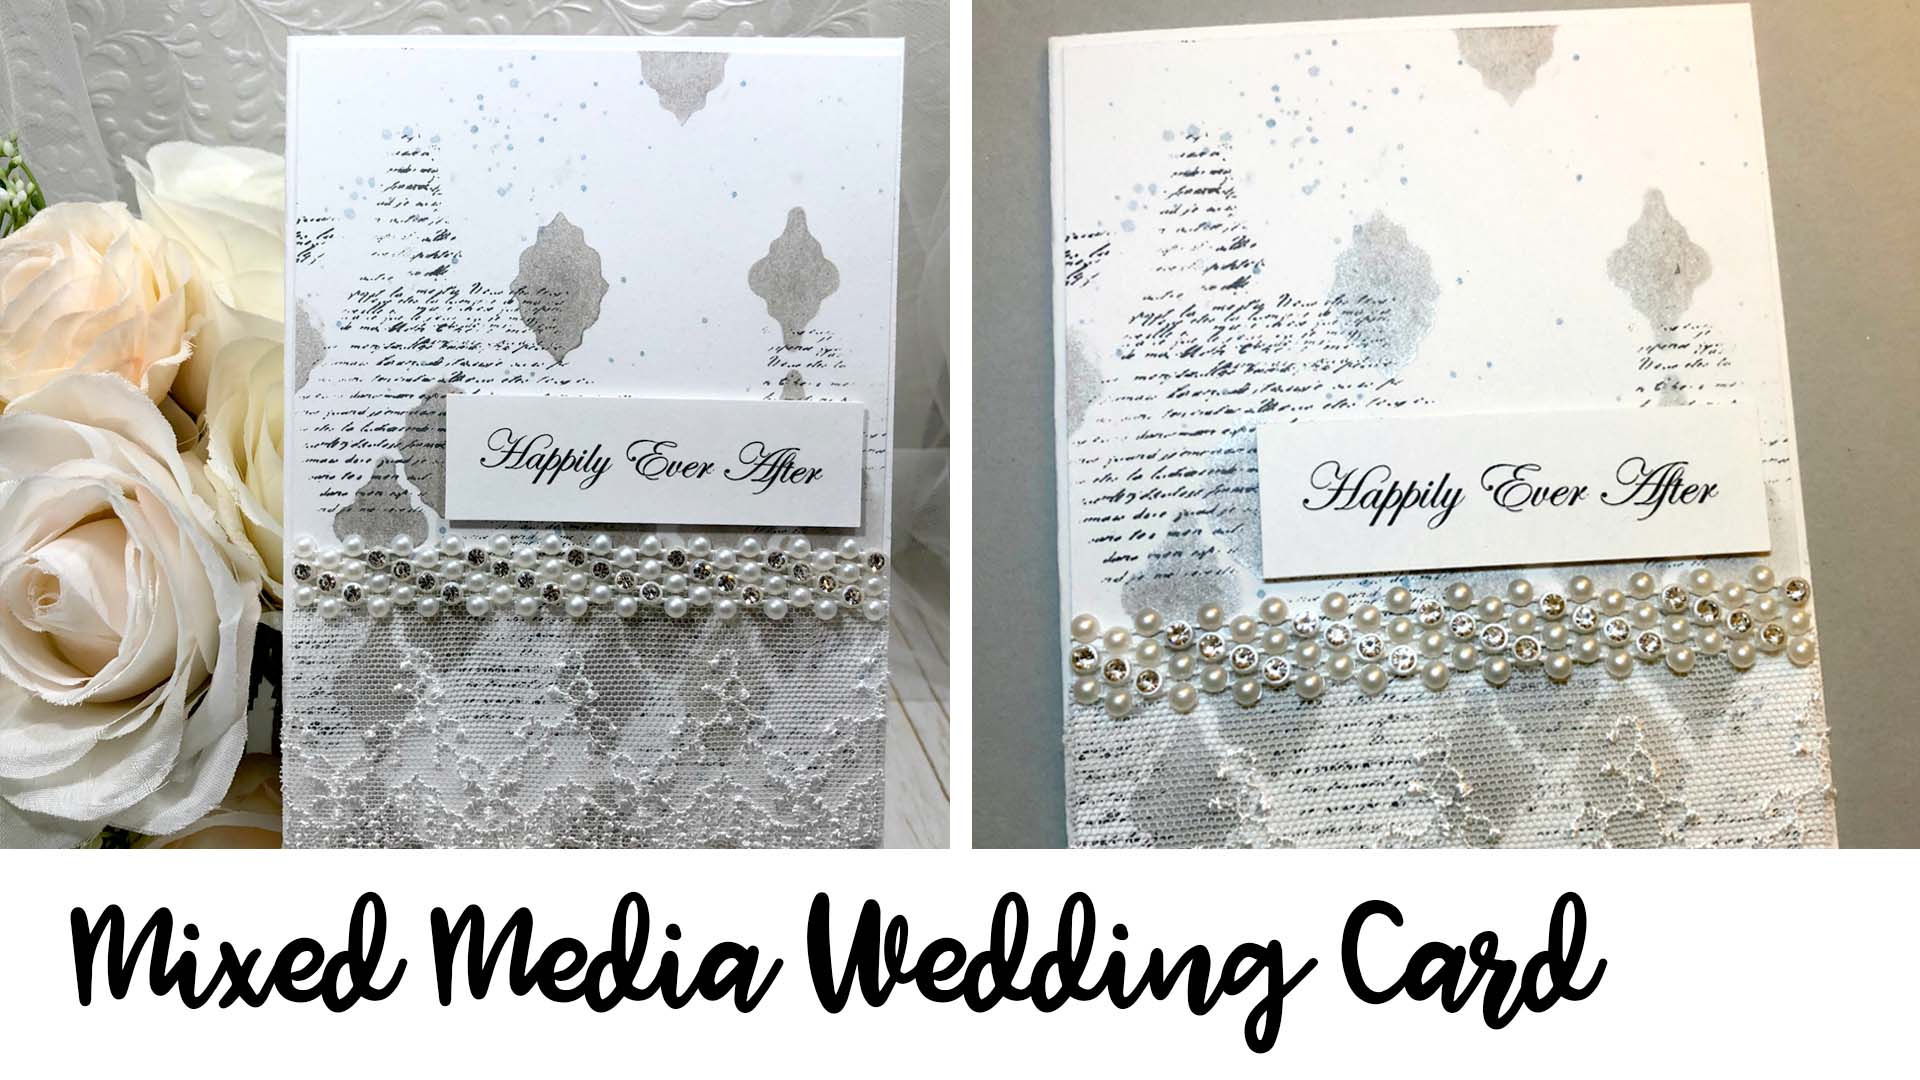 Handmade wedding invitations that are easy to make with an elegant pop of color.